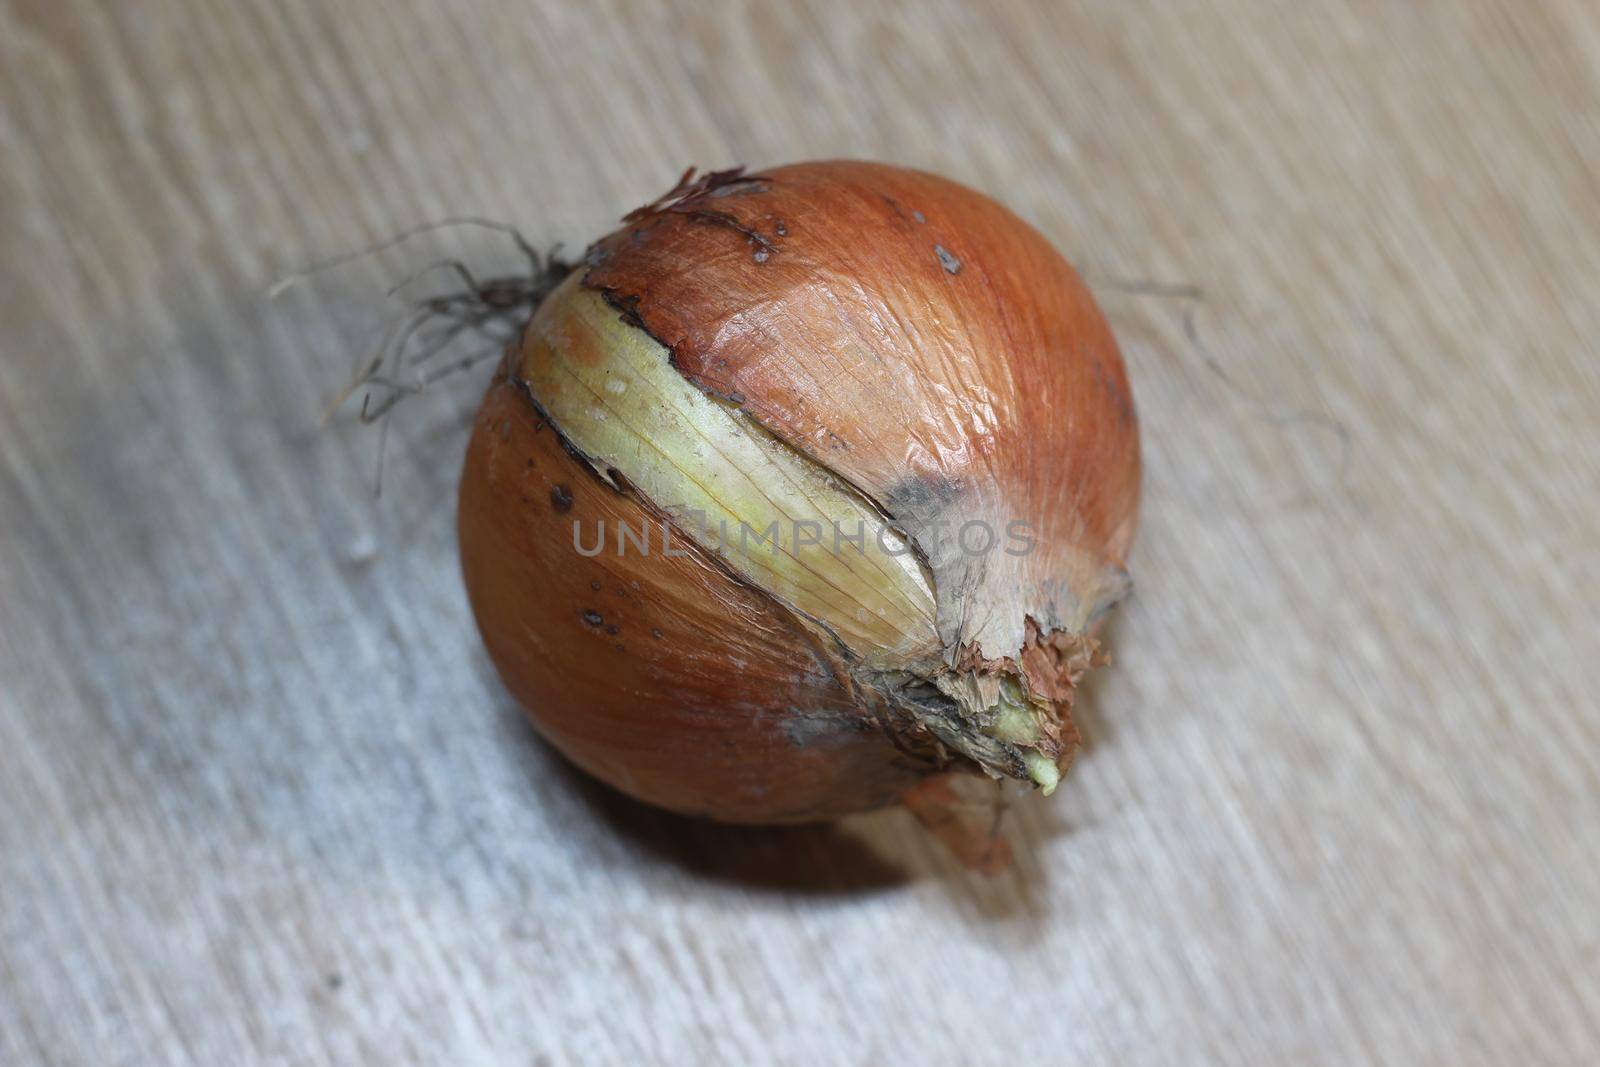 Closeup view of a fresh dry onion bulb. Onion with dry roots and brown peelings